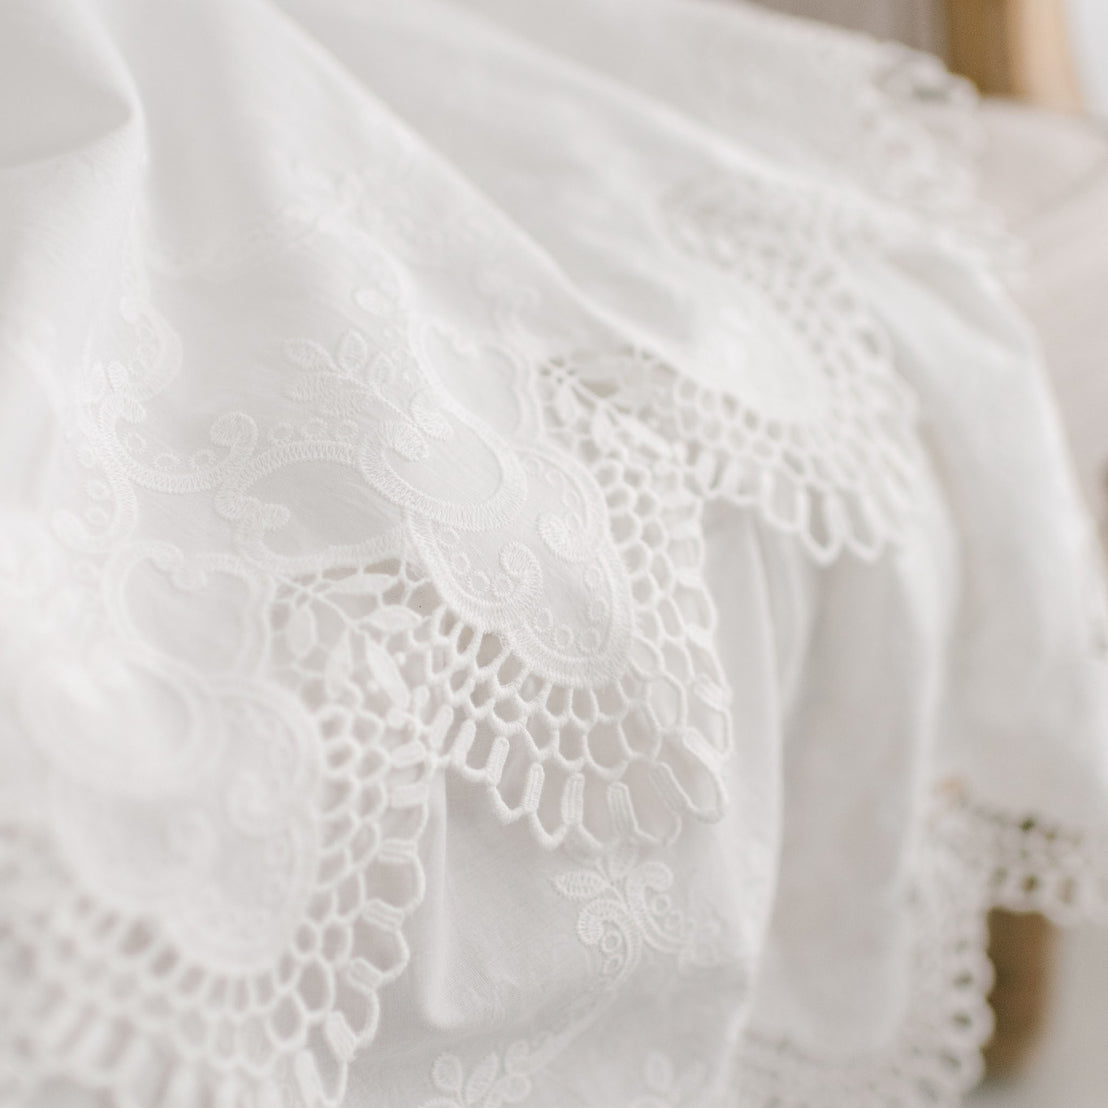 Close-up detail of the Lily Christening Gown skirt showcasing the two-tiered lace skirt with cotton eyelet lace and scalloped edges